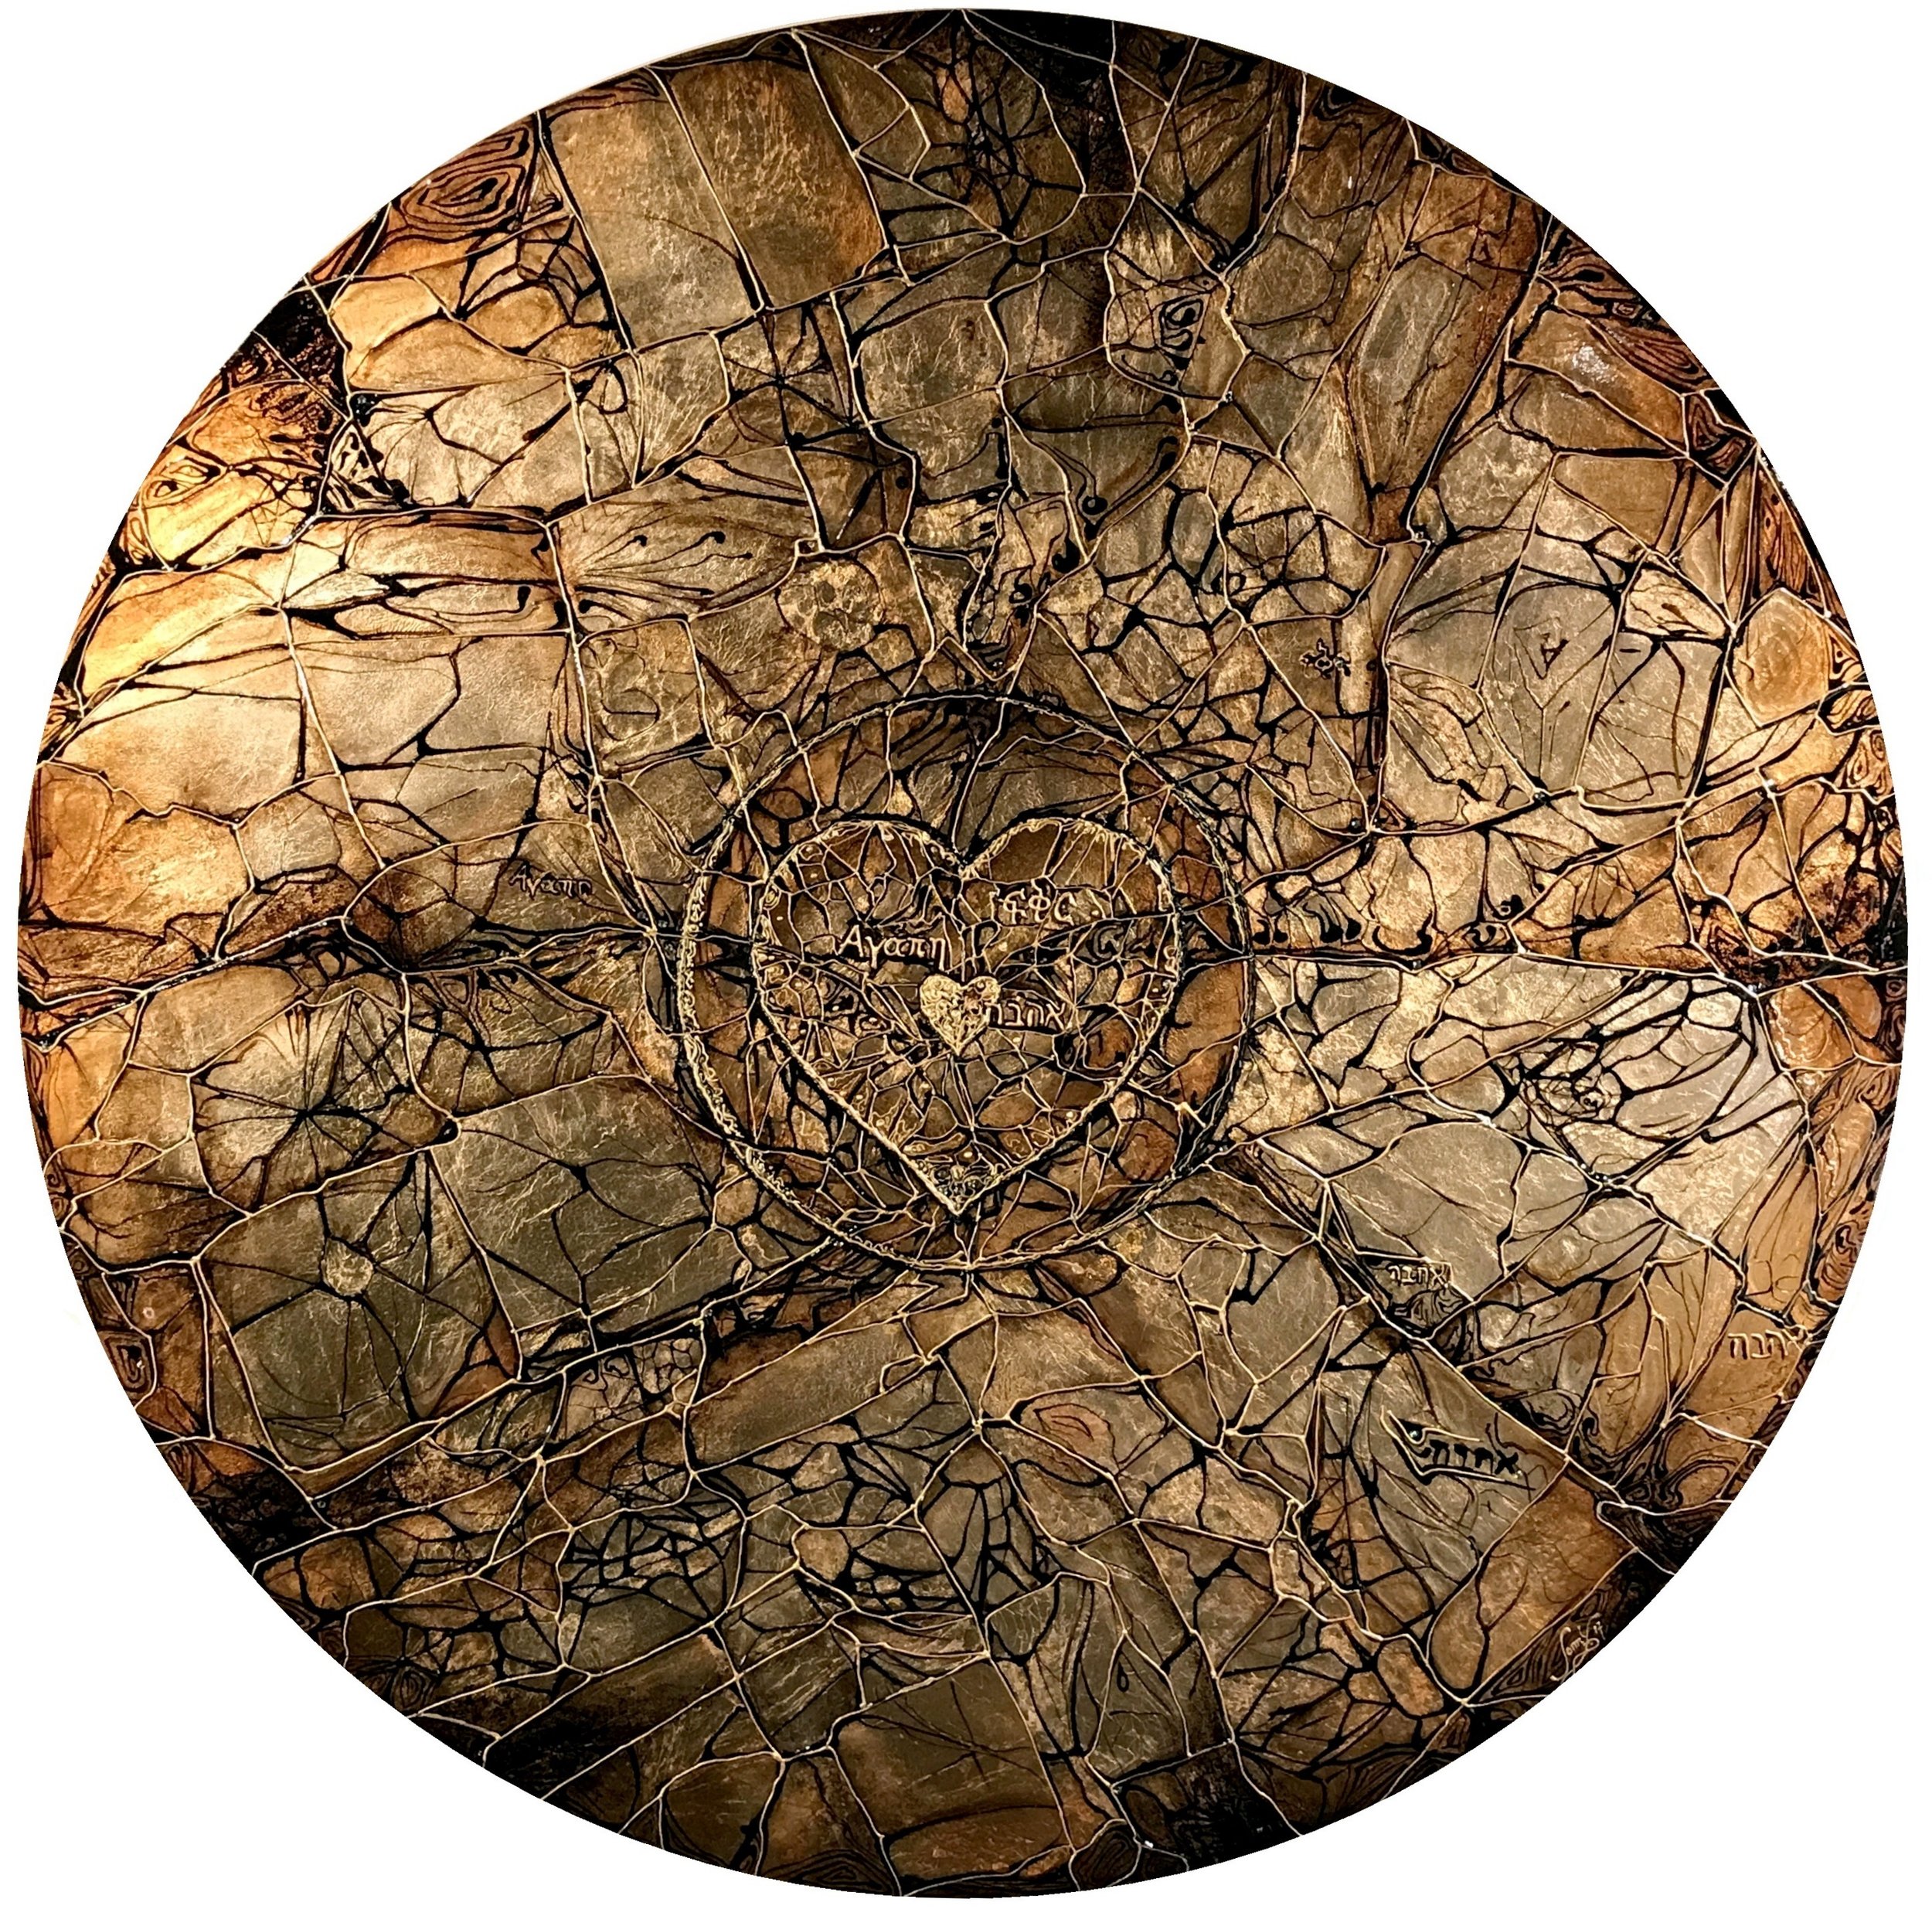 Living-Eye-Of-Life's-Collection-Nr.VI-Treasure-Map-by-Sonia-Domingues.JPG